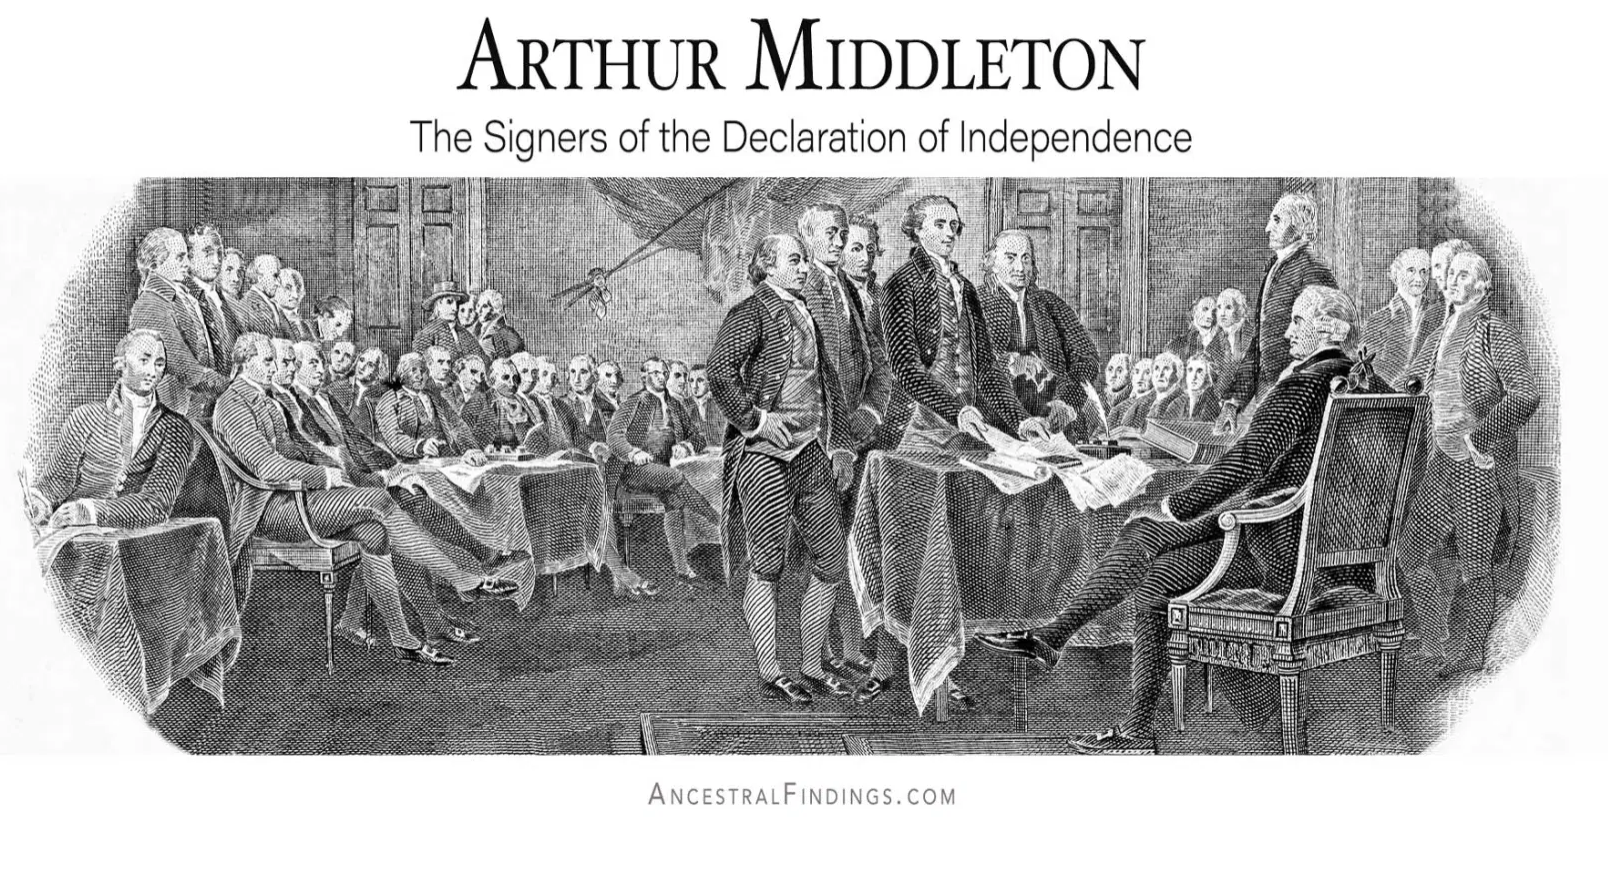 Arthur Middleton: The Signers of the Declaration of Independence